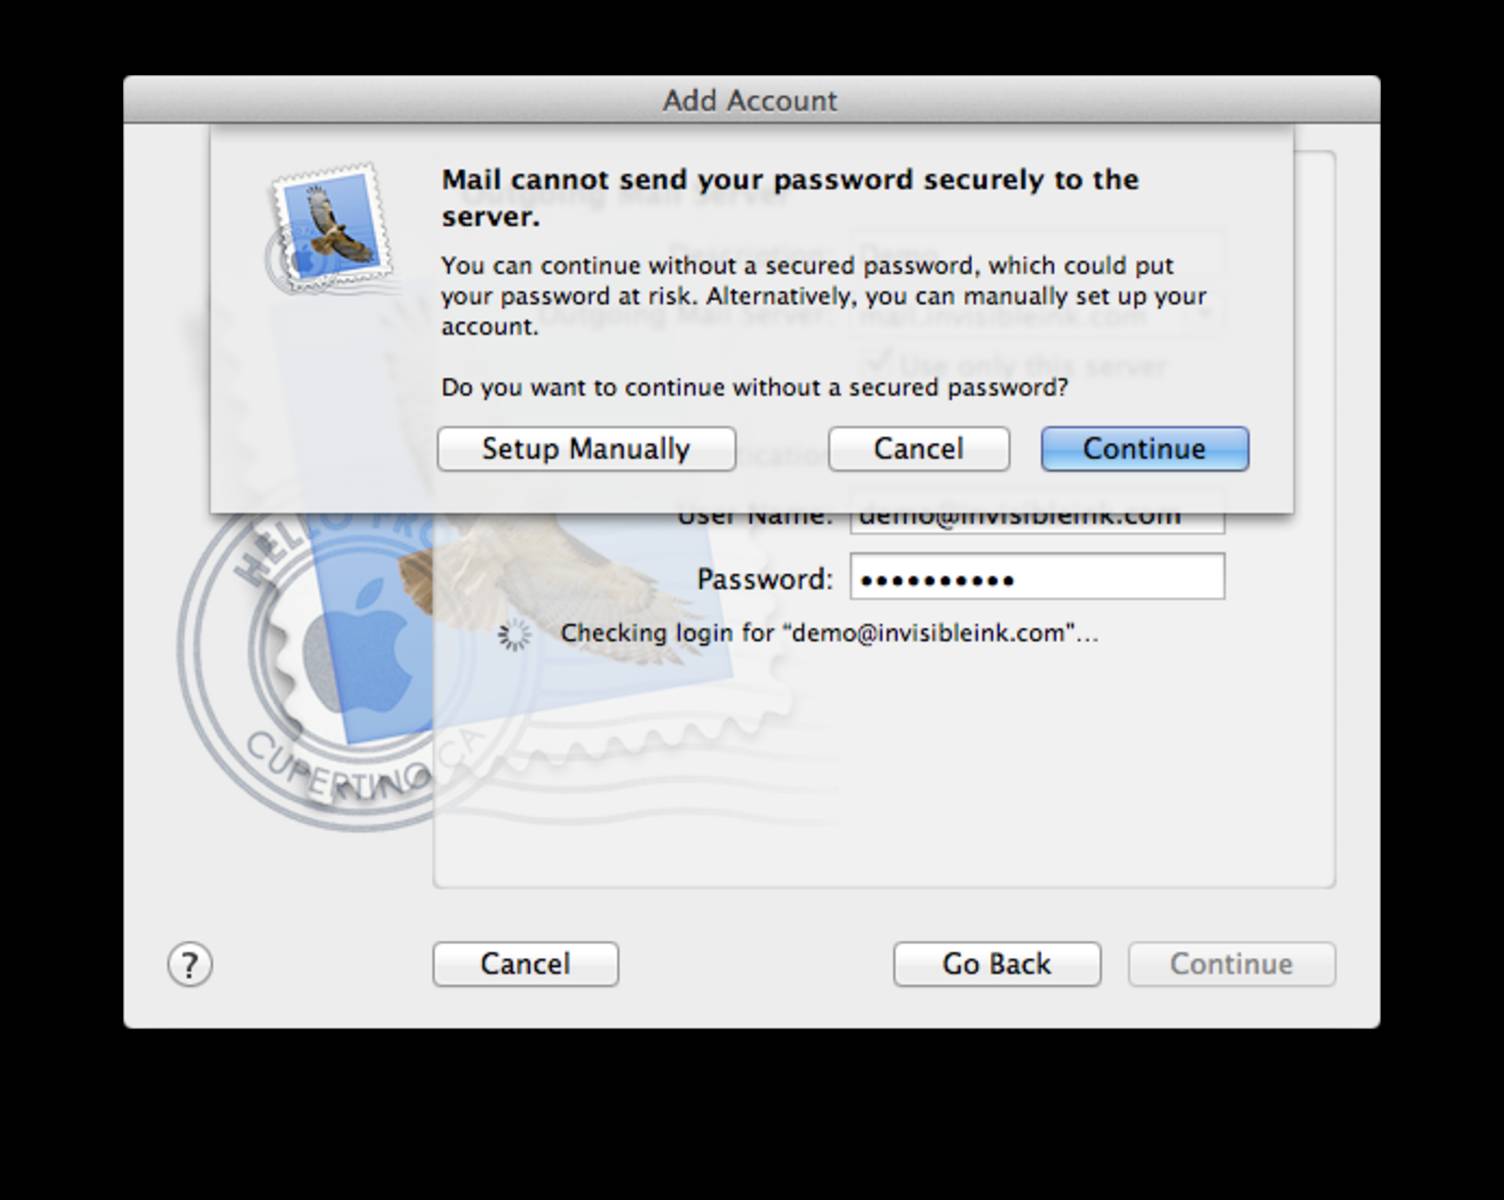 You will receive a password security warning. Click Setup Manually.